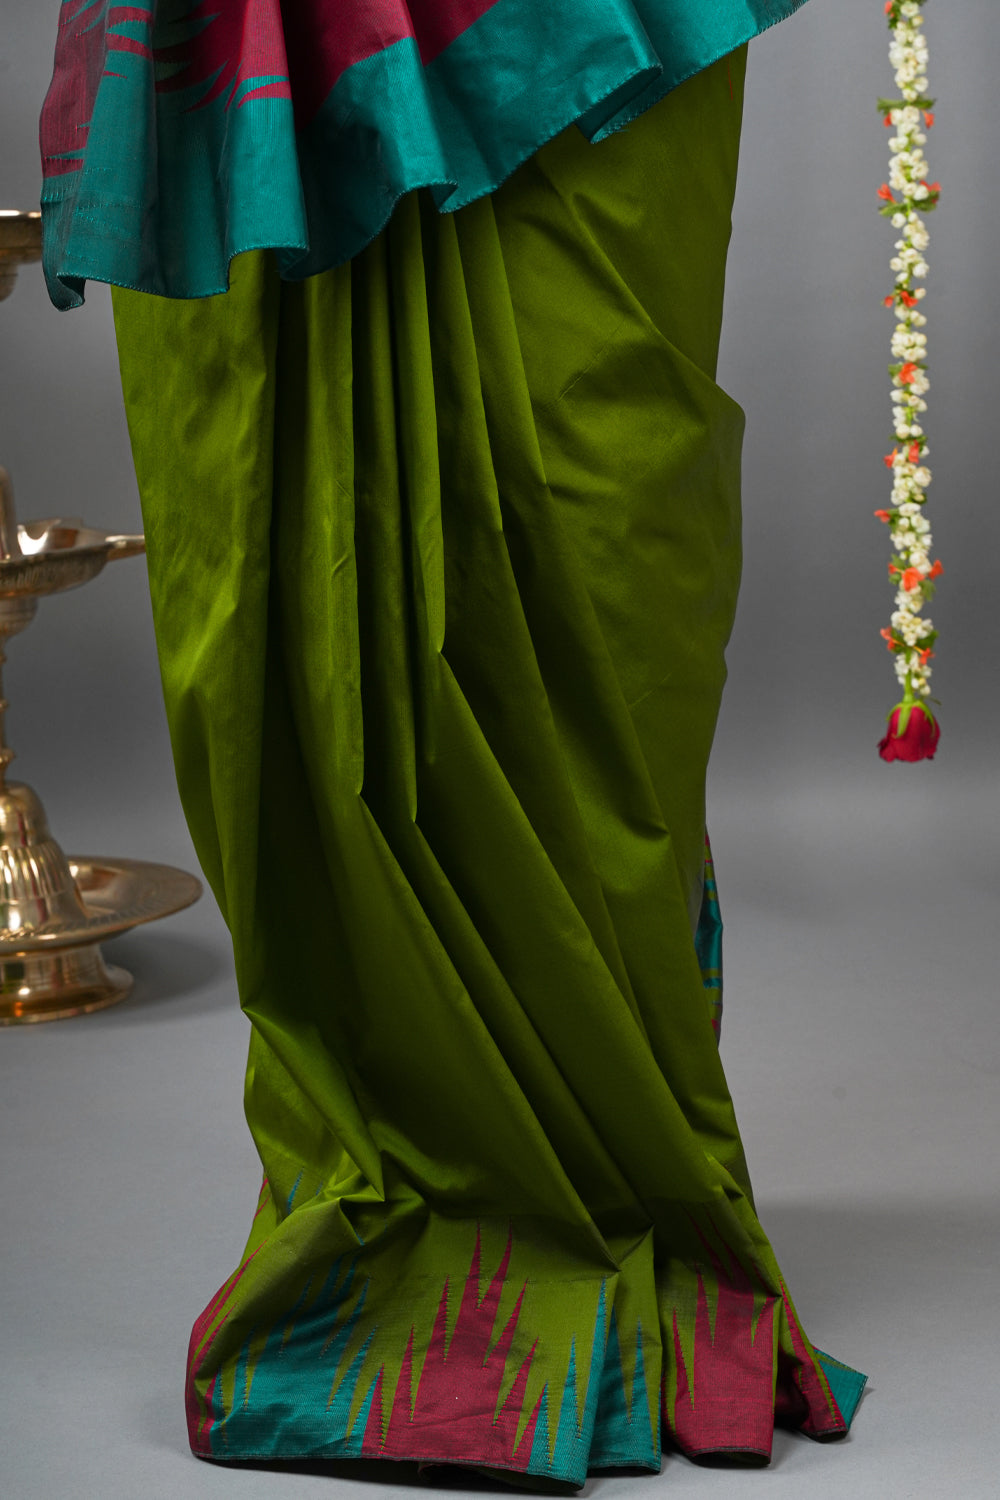 Sap Green Tone and Two Color Temple Border on Art Silk Saree With Double color Indian kotki design Pallu